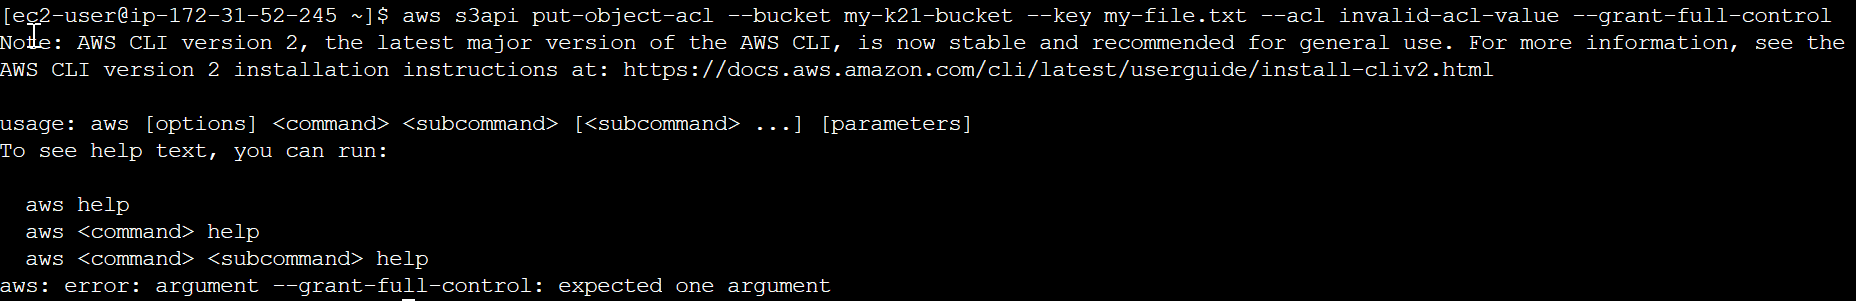 Troubleshooting AWS S3 errors in AWS CLI: invalidargument